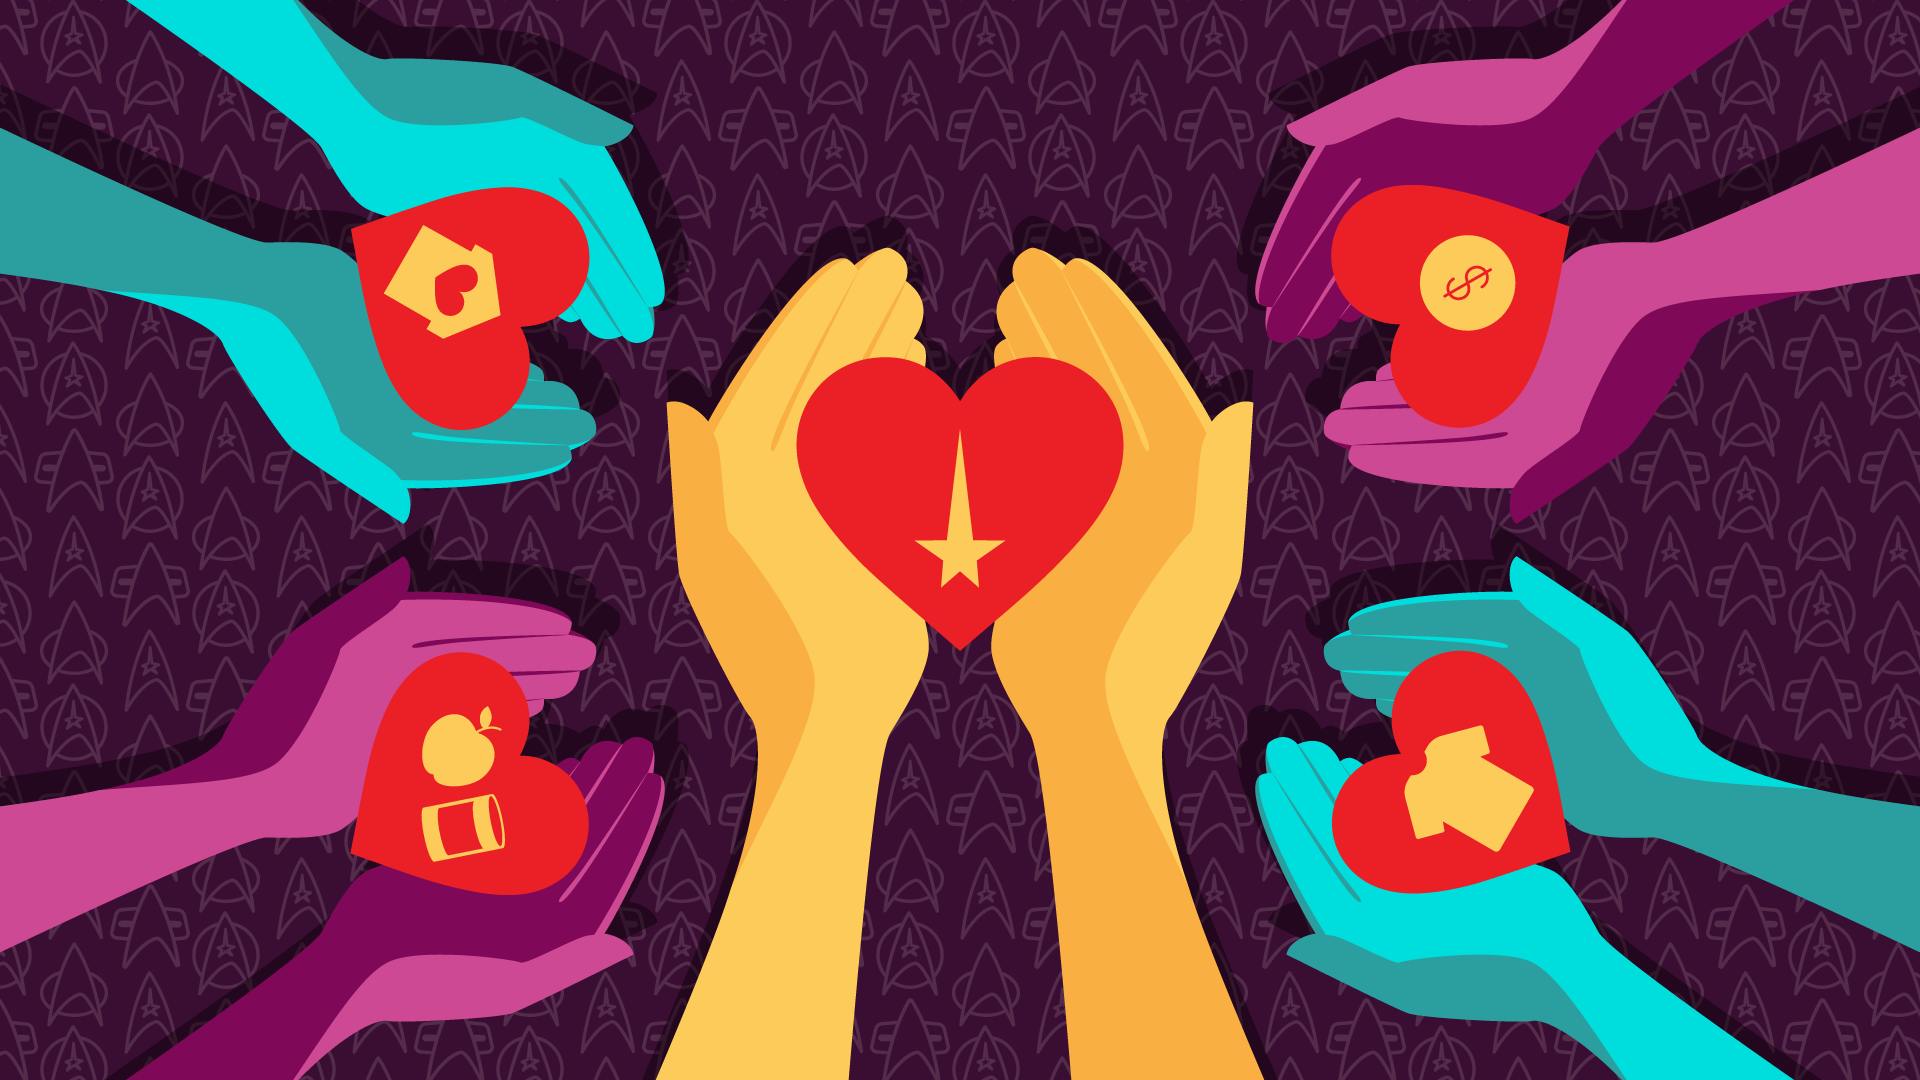 Illustration of hands cradling a heart with iconography of a home, money, clothing, food, and Star Trek delta